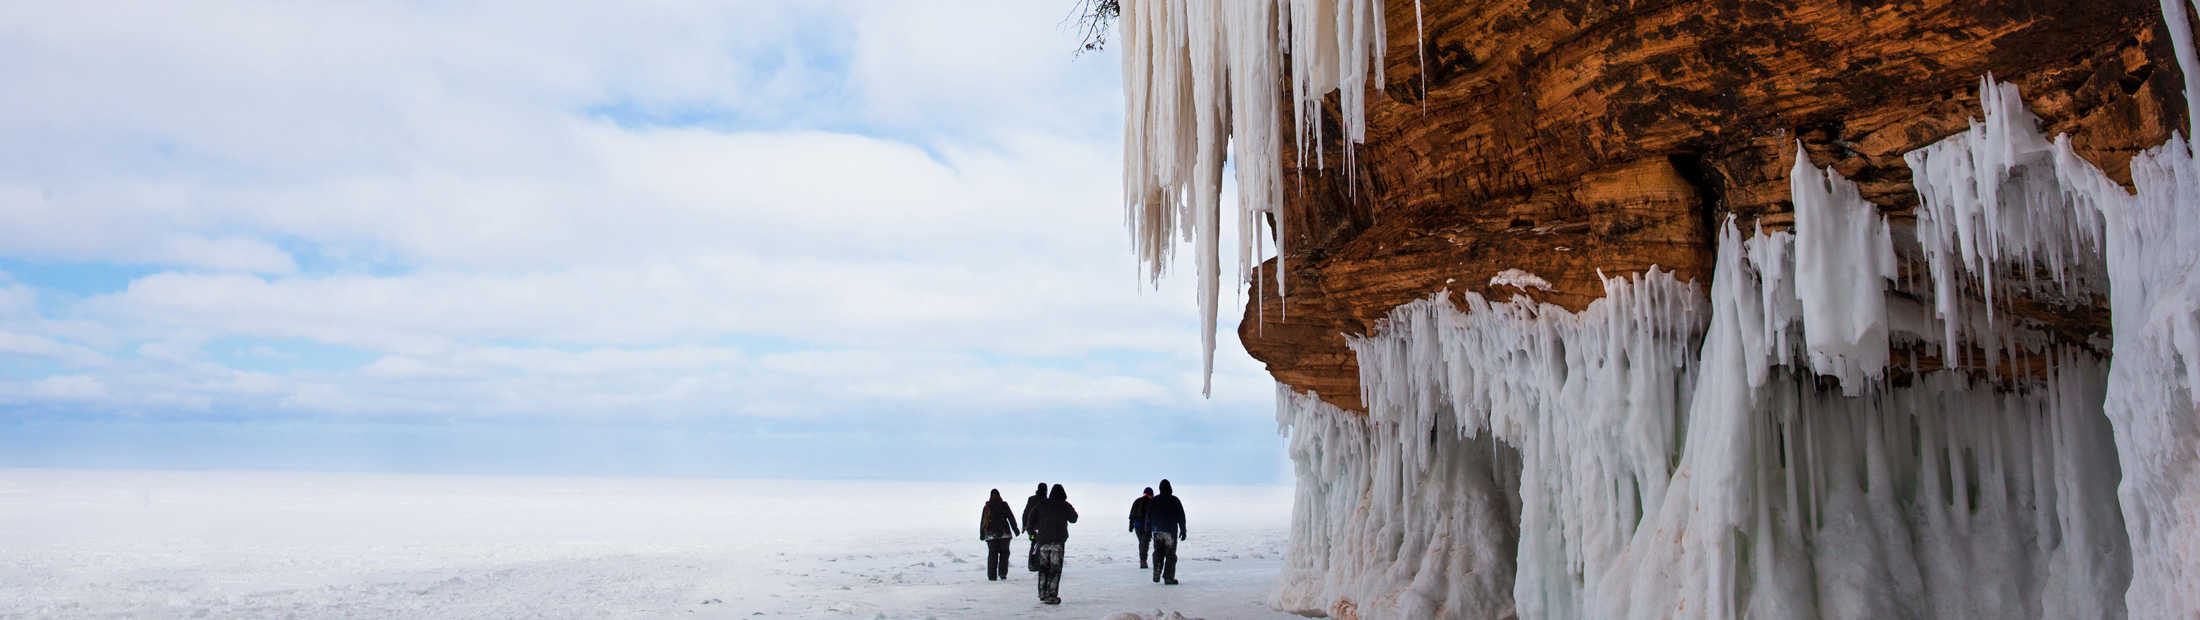 People walking outside ice caves. Photo: Getty Images